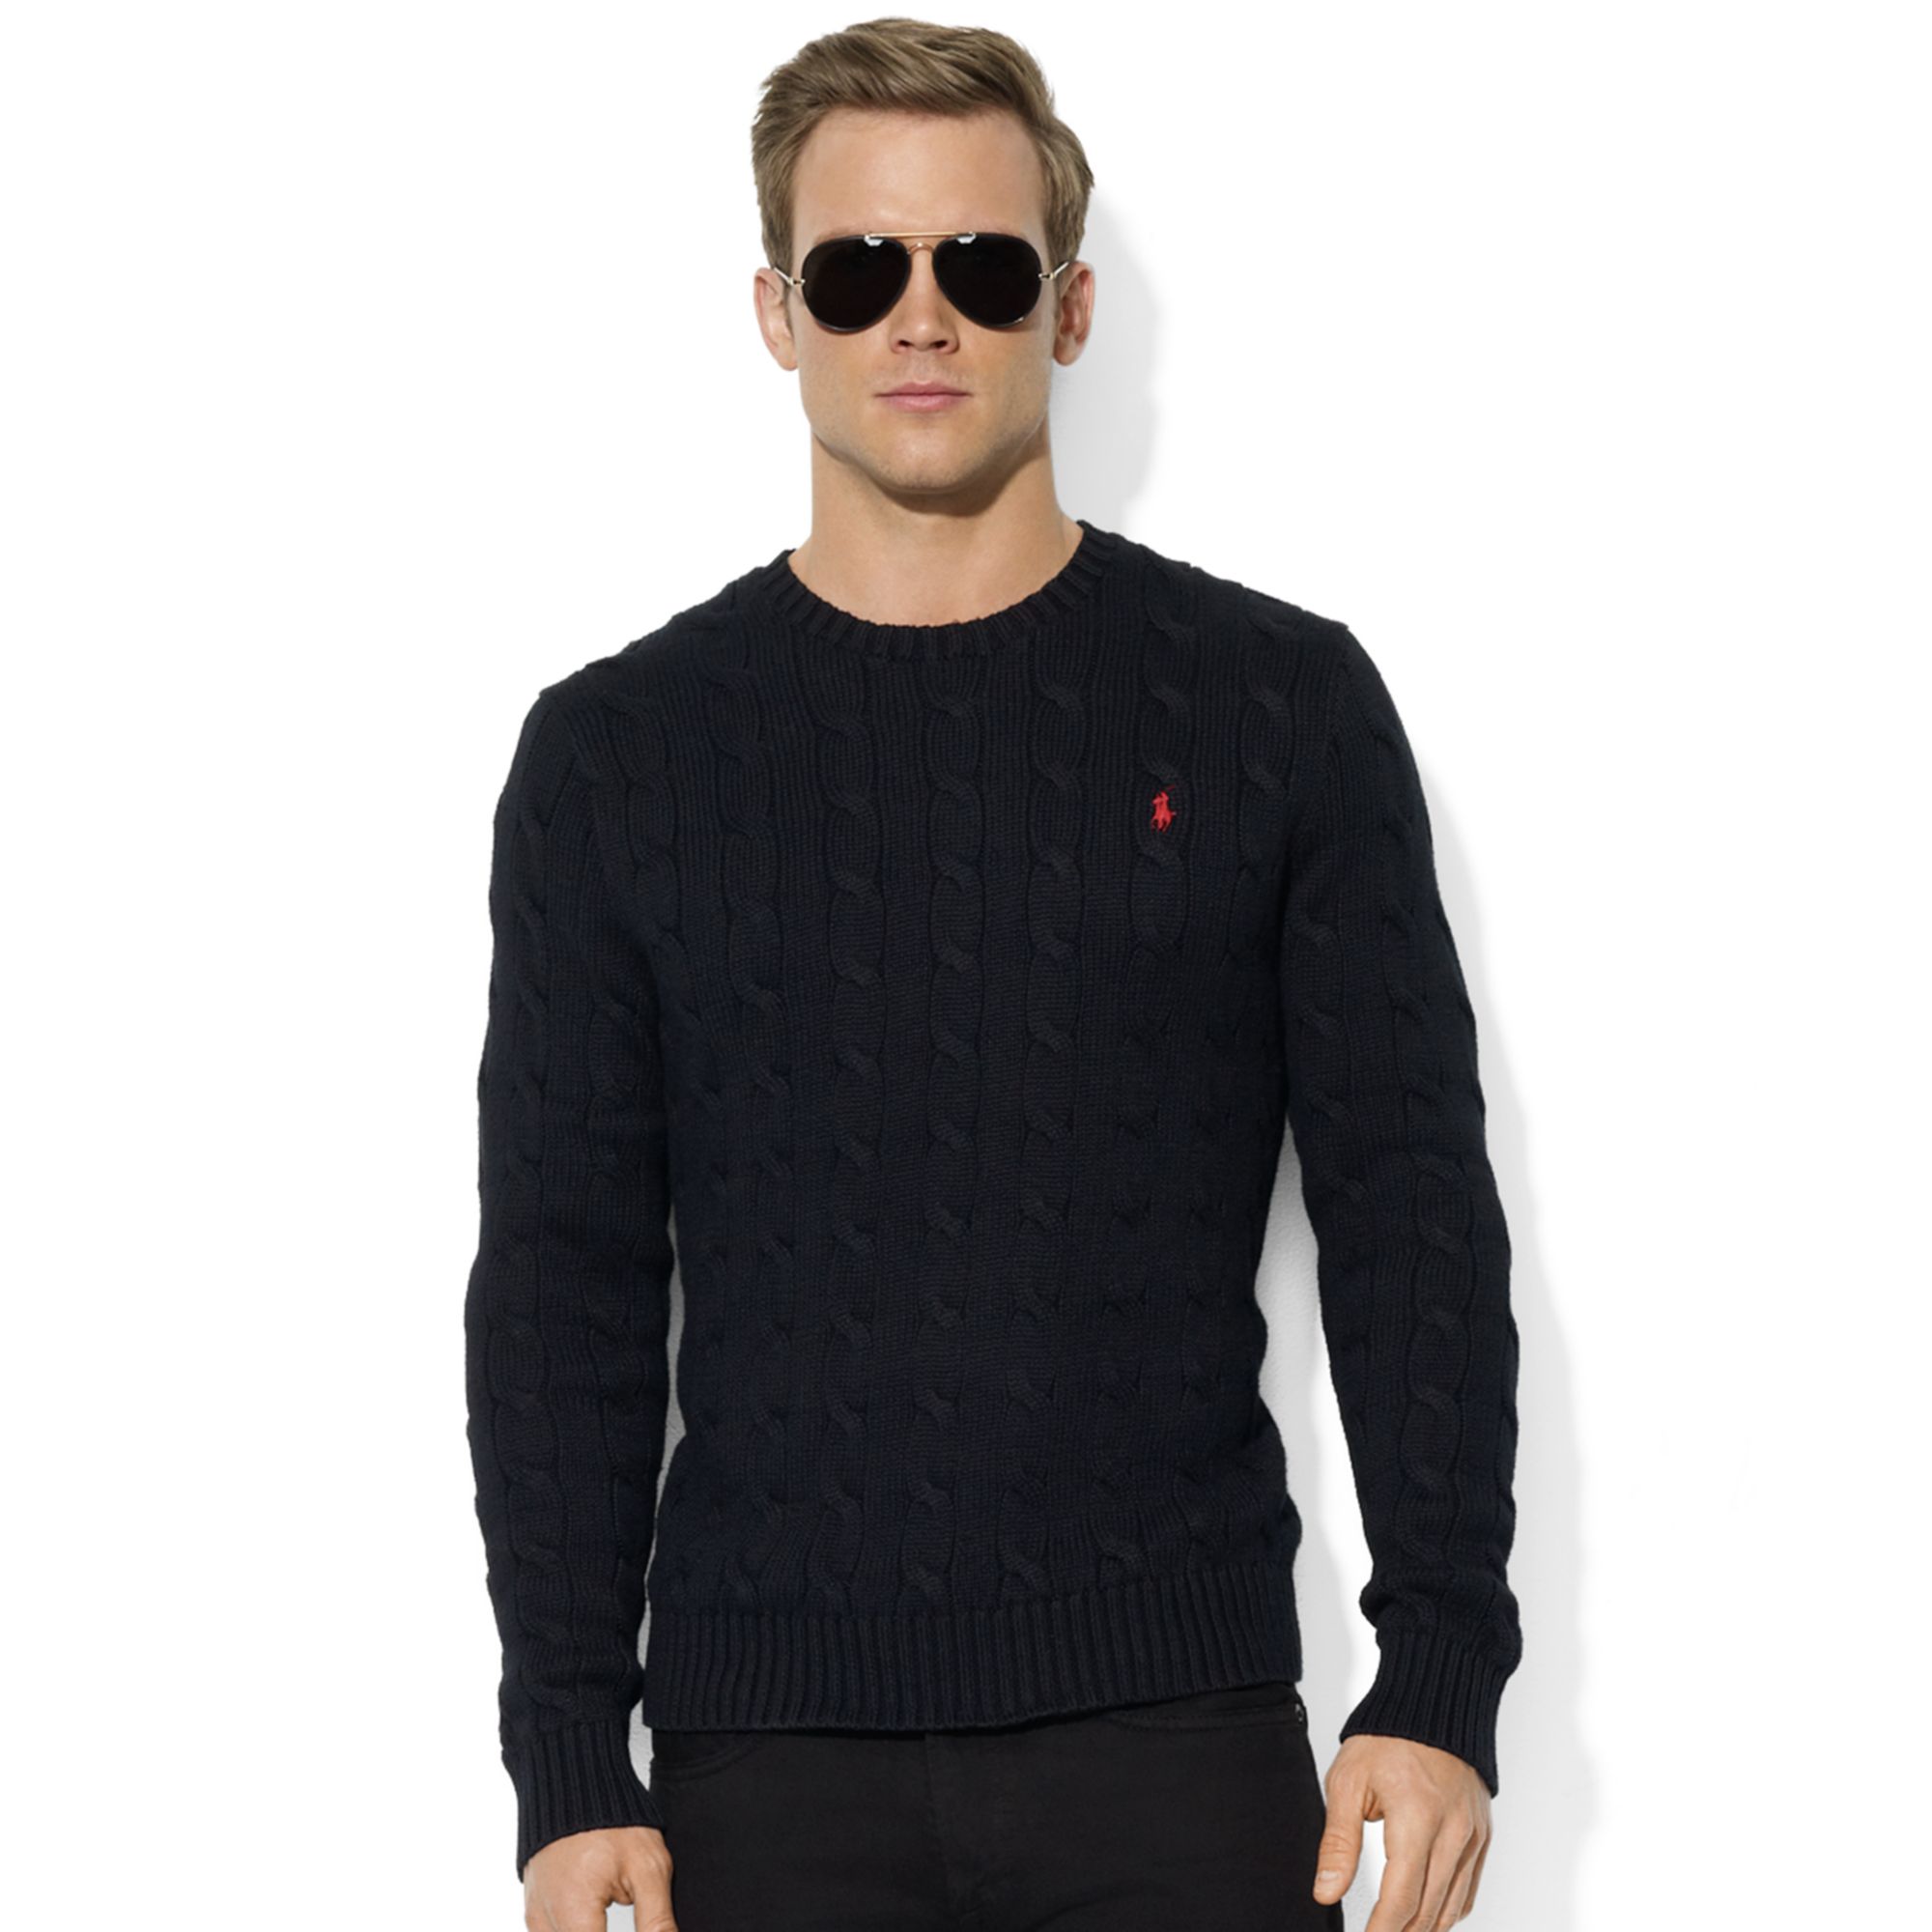 Lyst - Ralph Lauren Roving Crew Neck Cable Cotton Sweater in Black for Men